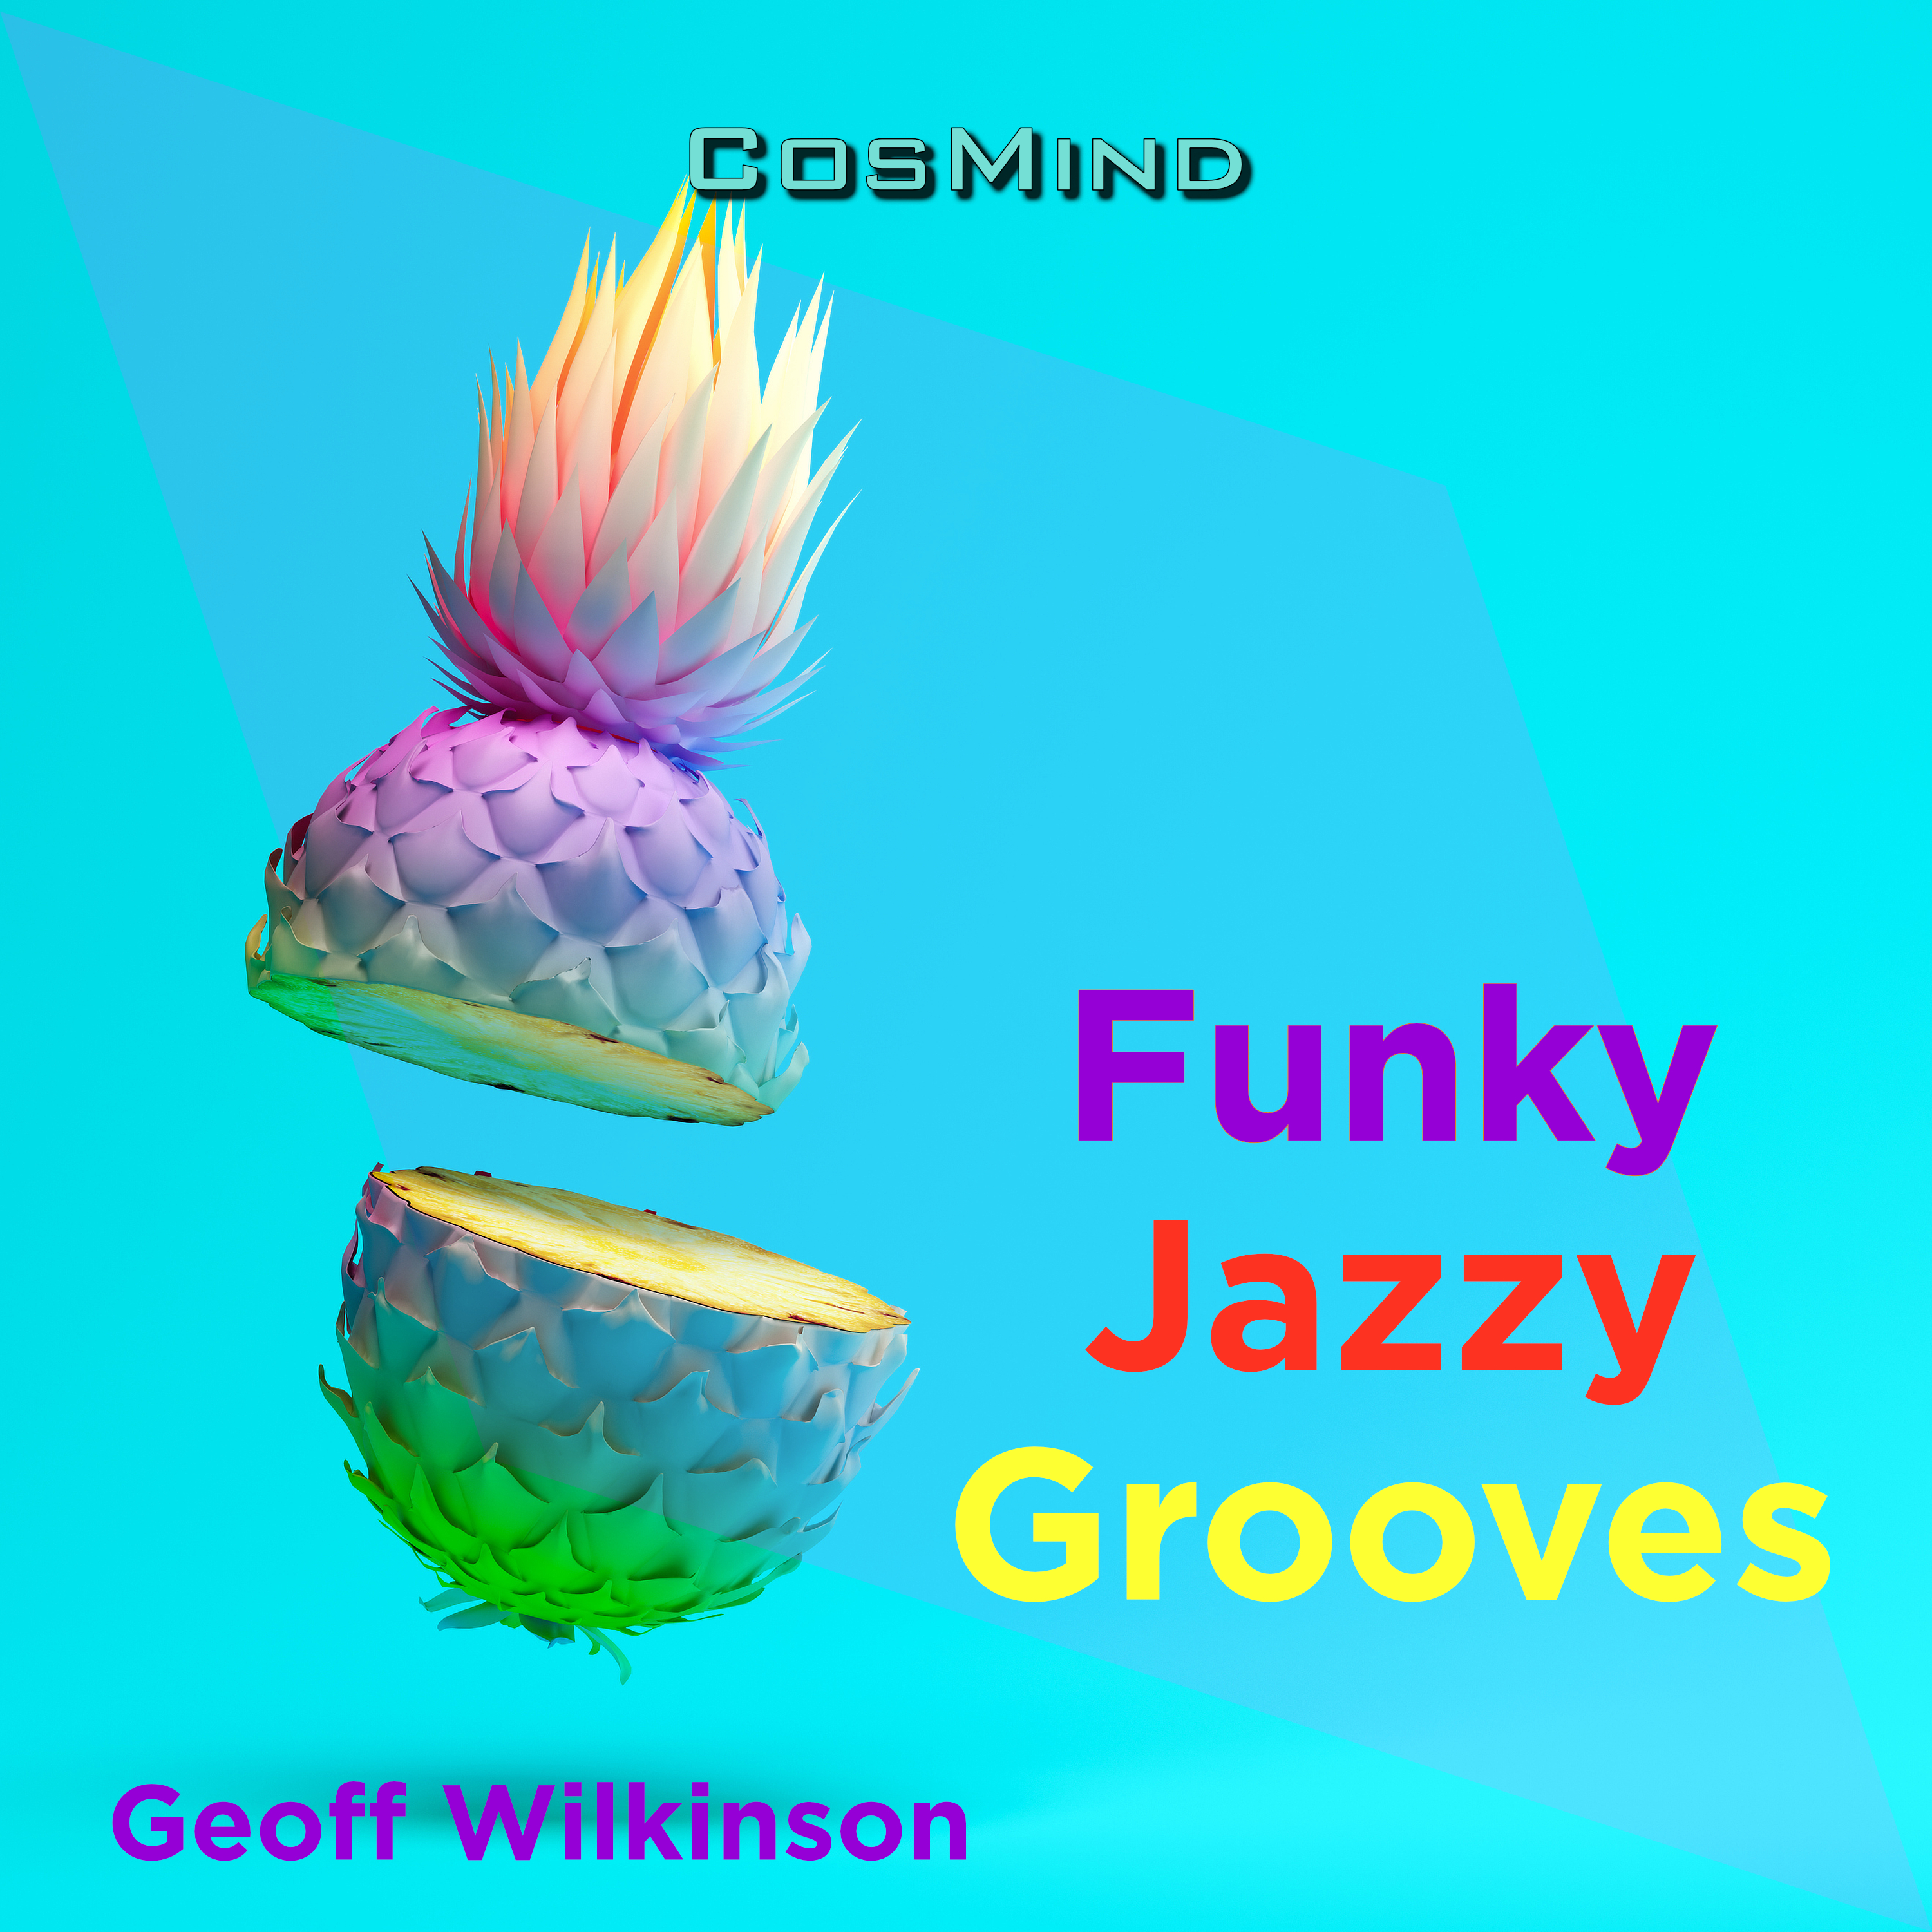 Funky Jazzy Grooves